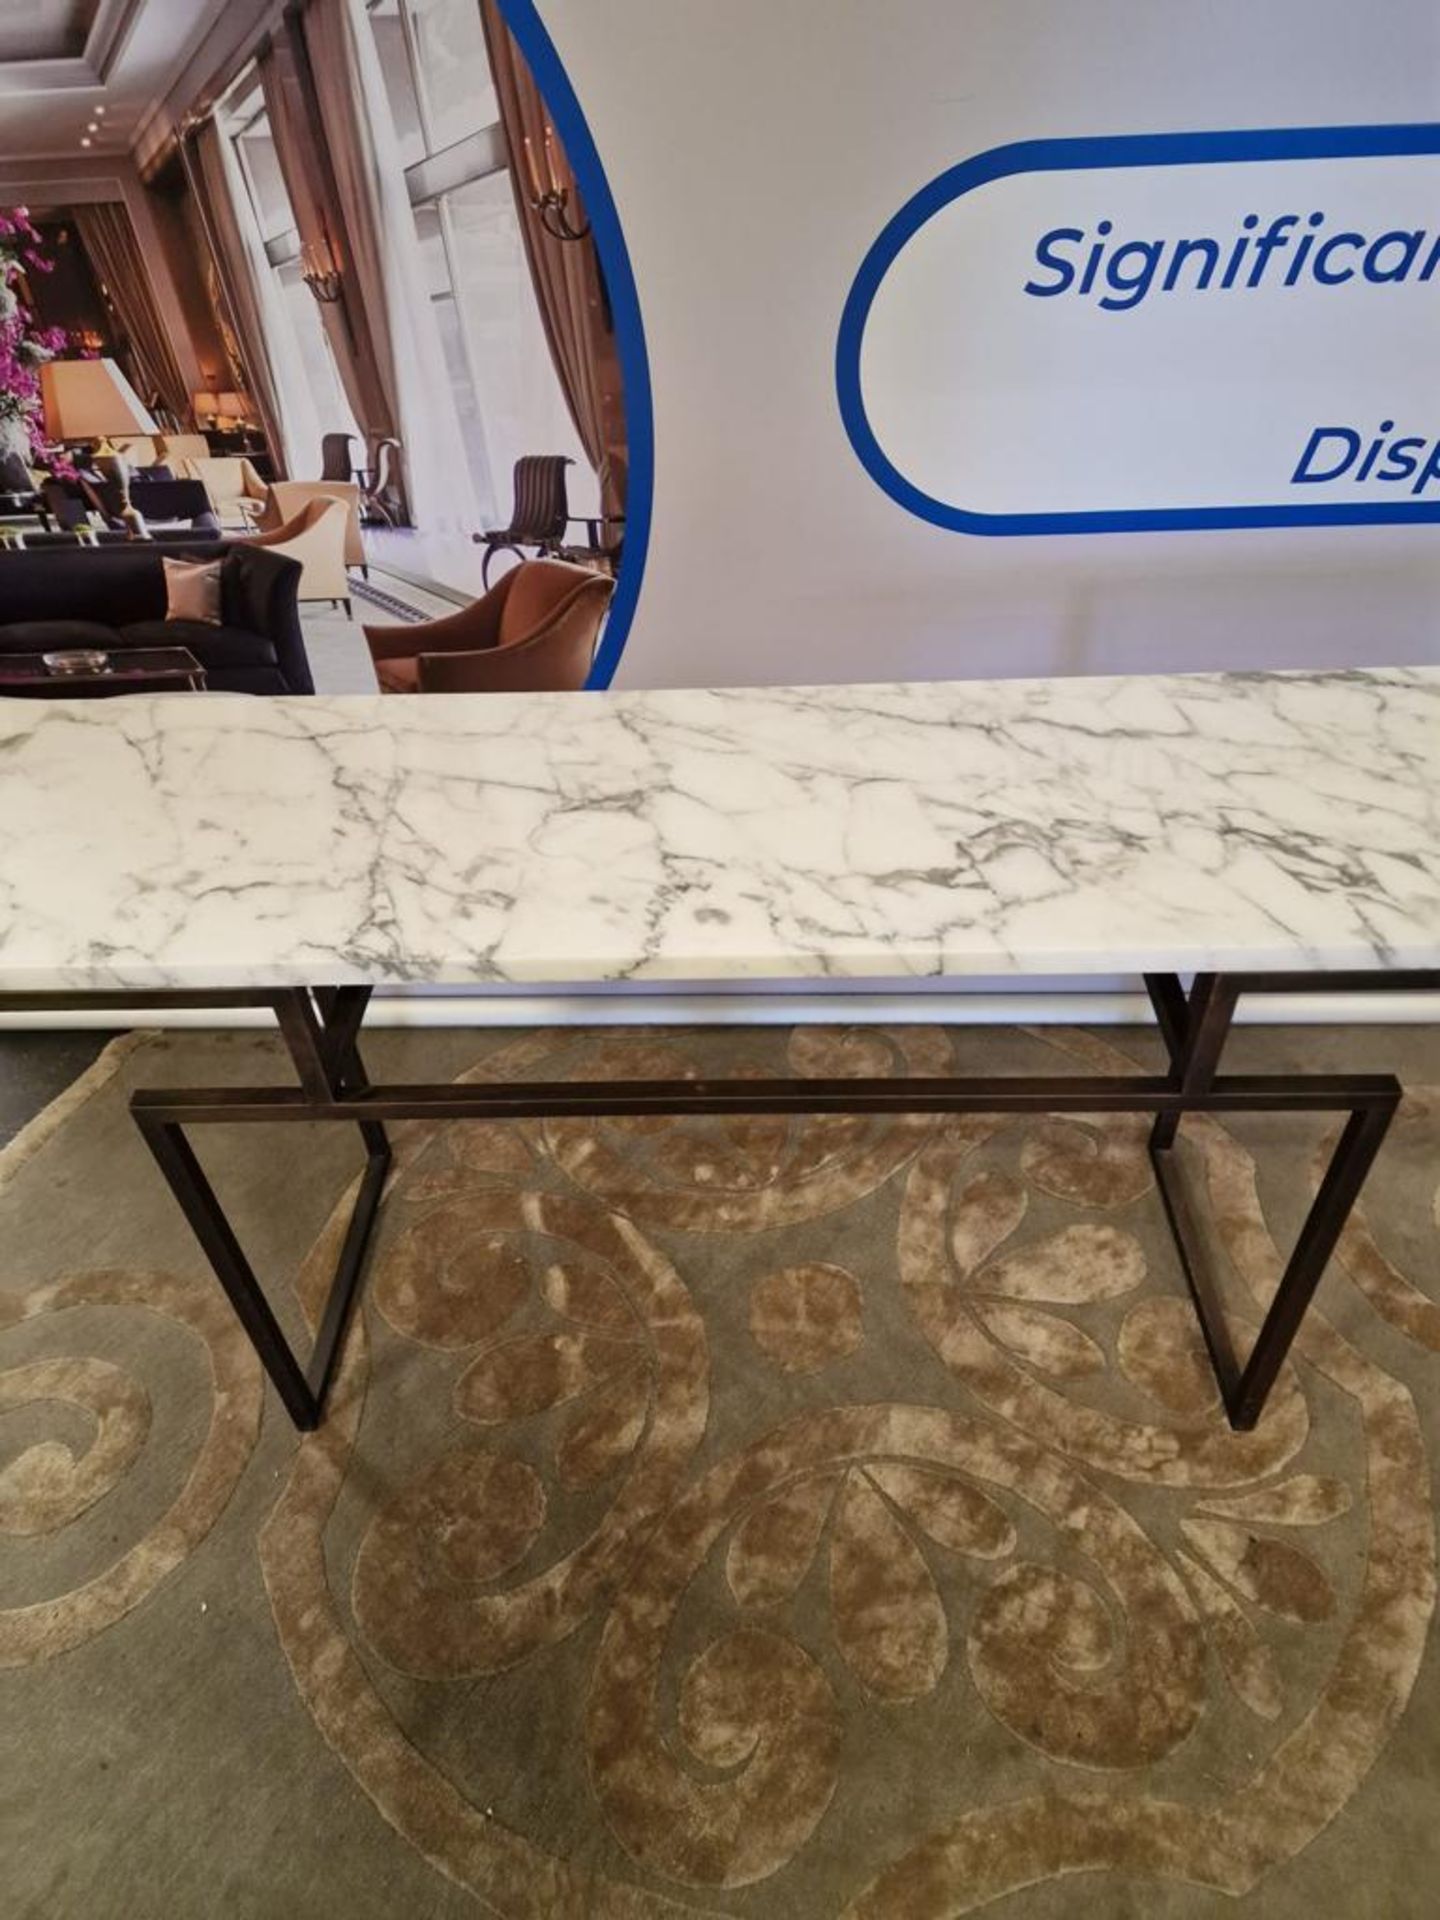 Luxsale Console Table Bronzed Metal Frame With White Carrara Marble Top 170 x 45 x 80cm - Image 3 of 3